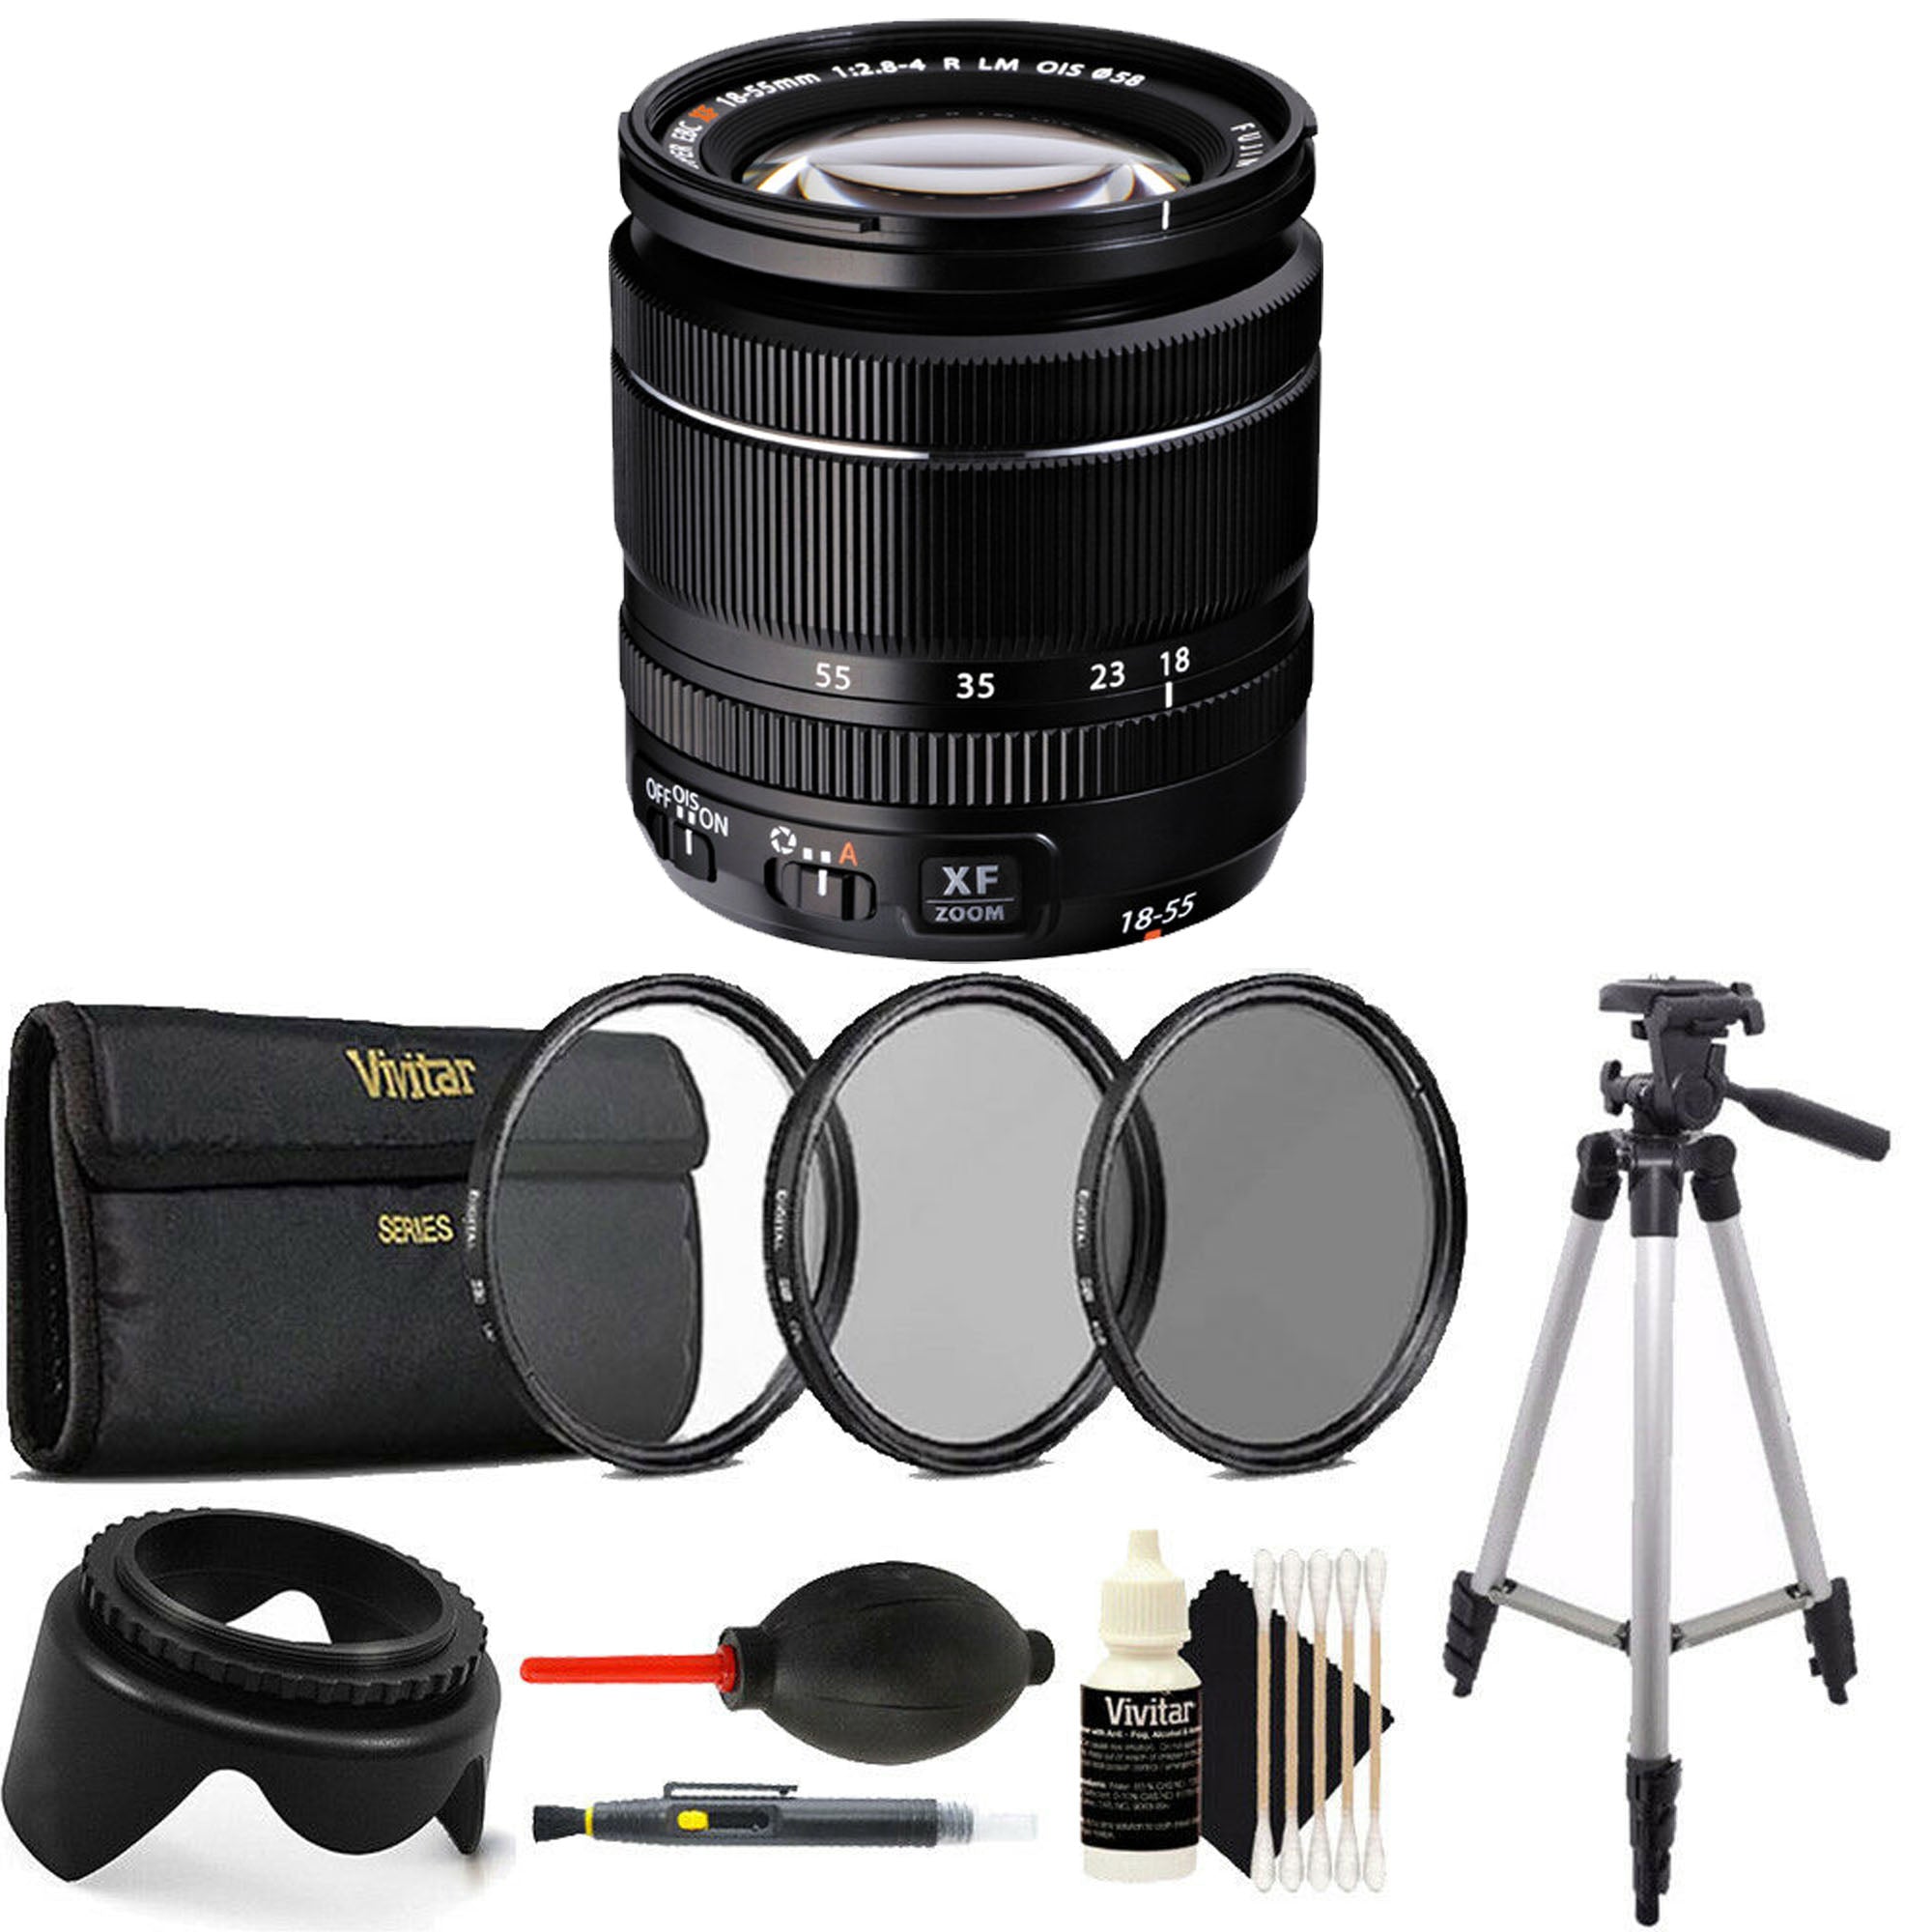 Fujifilm XF 18-55mm F2.8-4 R LM OIS Zoom Lens for sale online